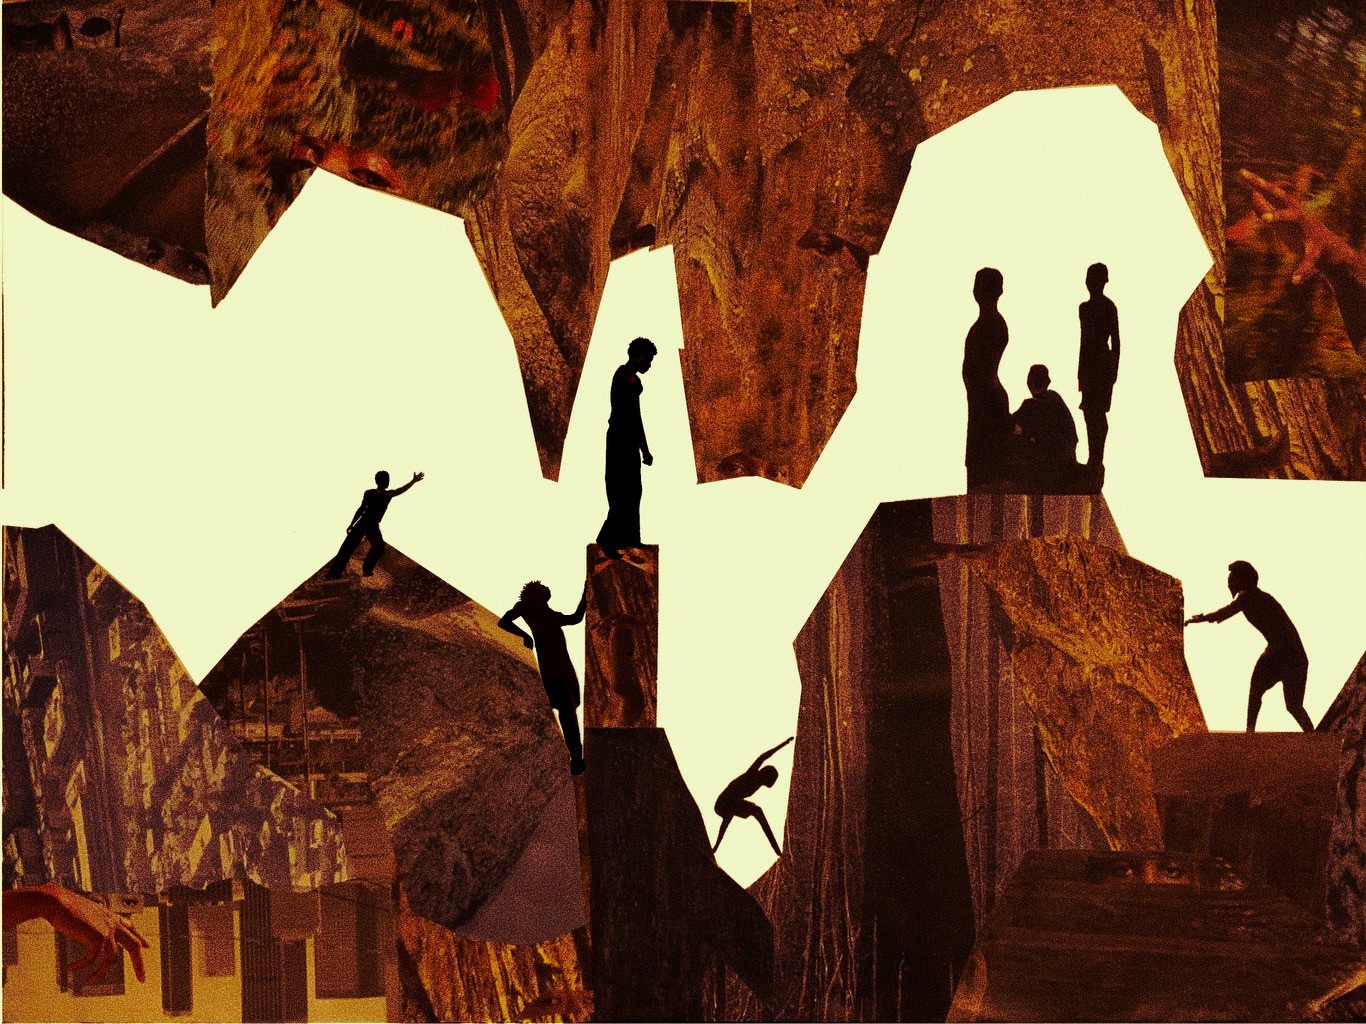 A brown and yellow collage of silhouetted figures. The people stand and move on jagged rocks.